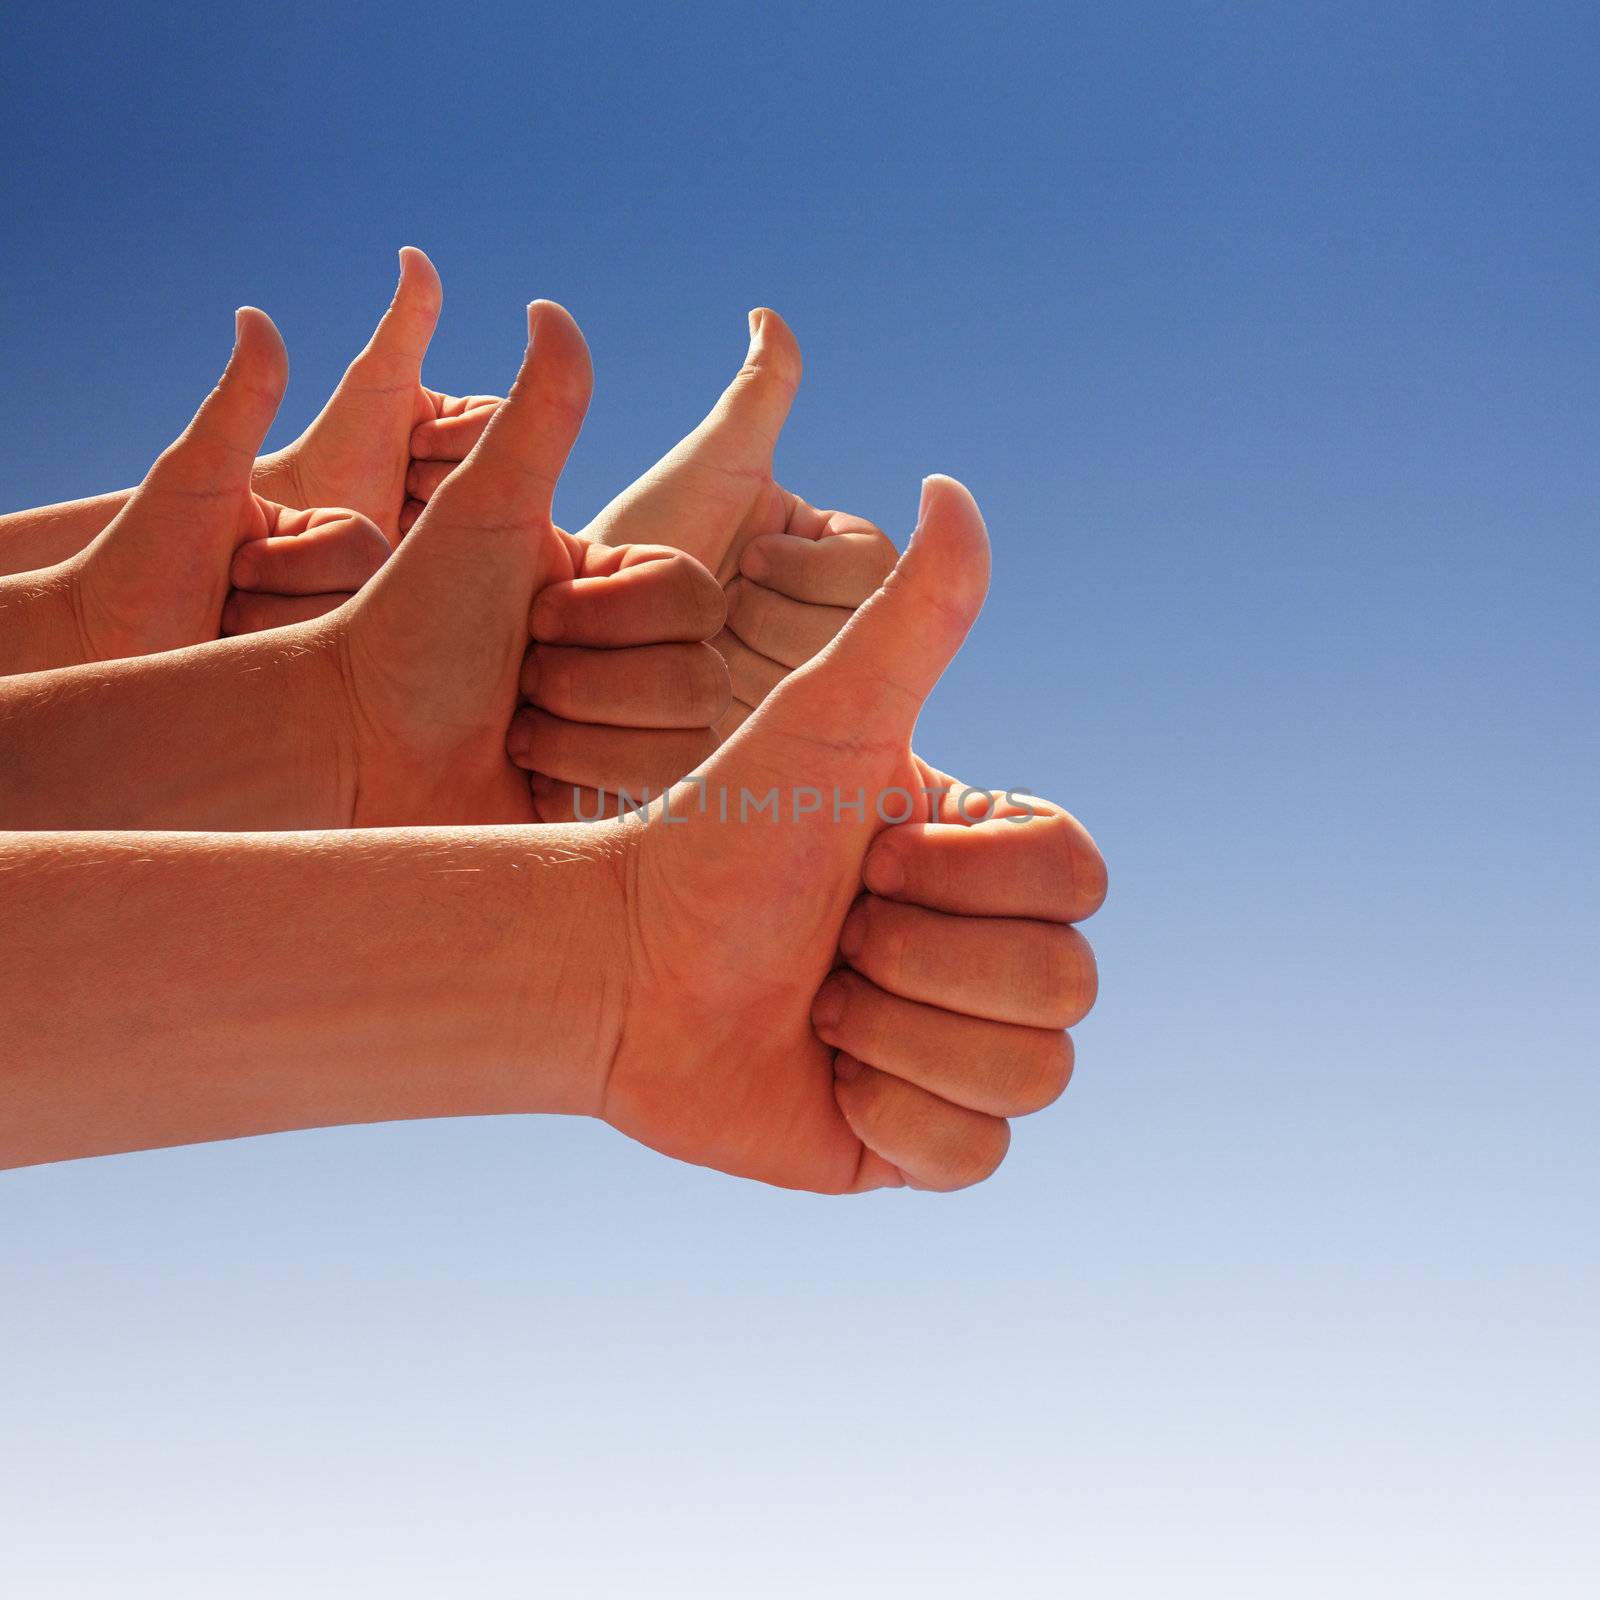 thumbs up by photochecker